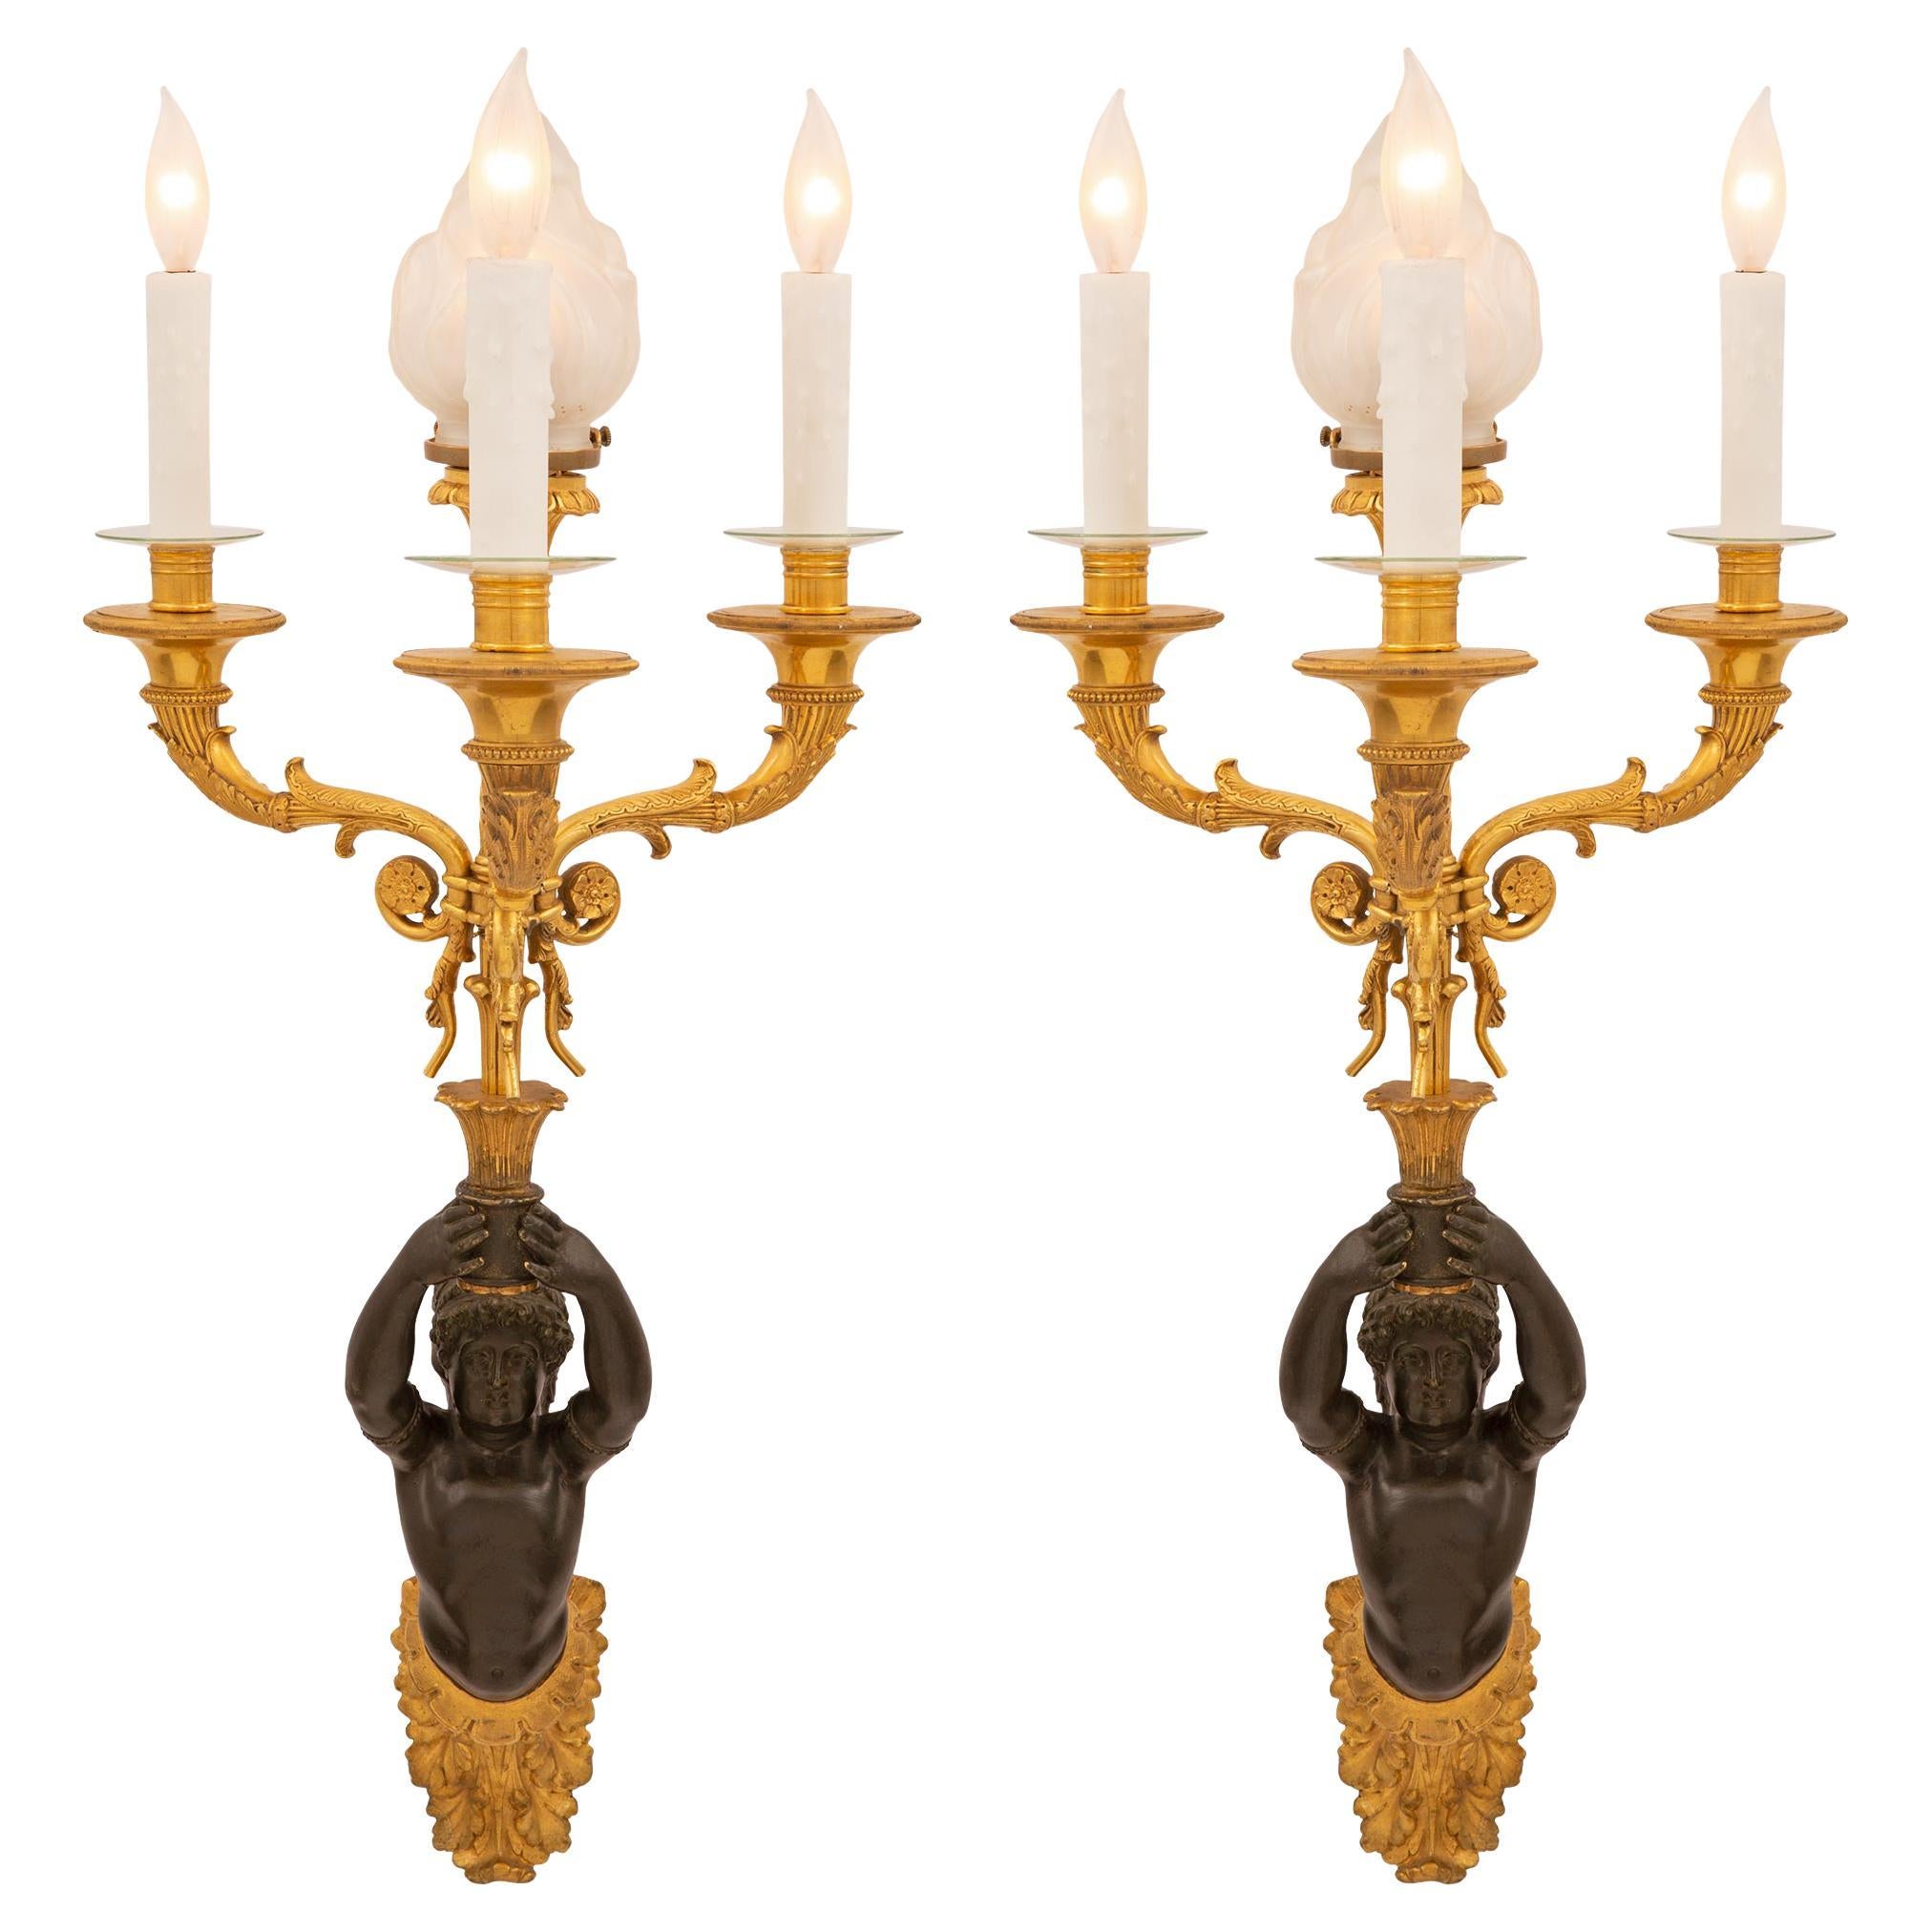 Pair of 19th Century Neoclassical Style Ormolu and Patinated Bronze Sconces